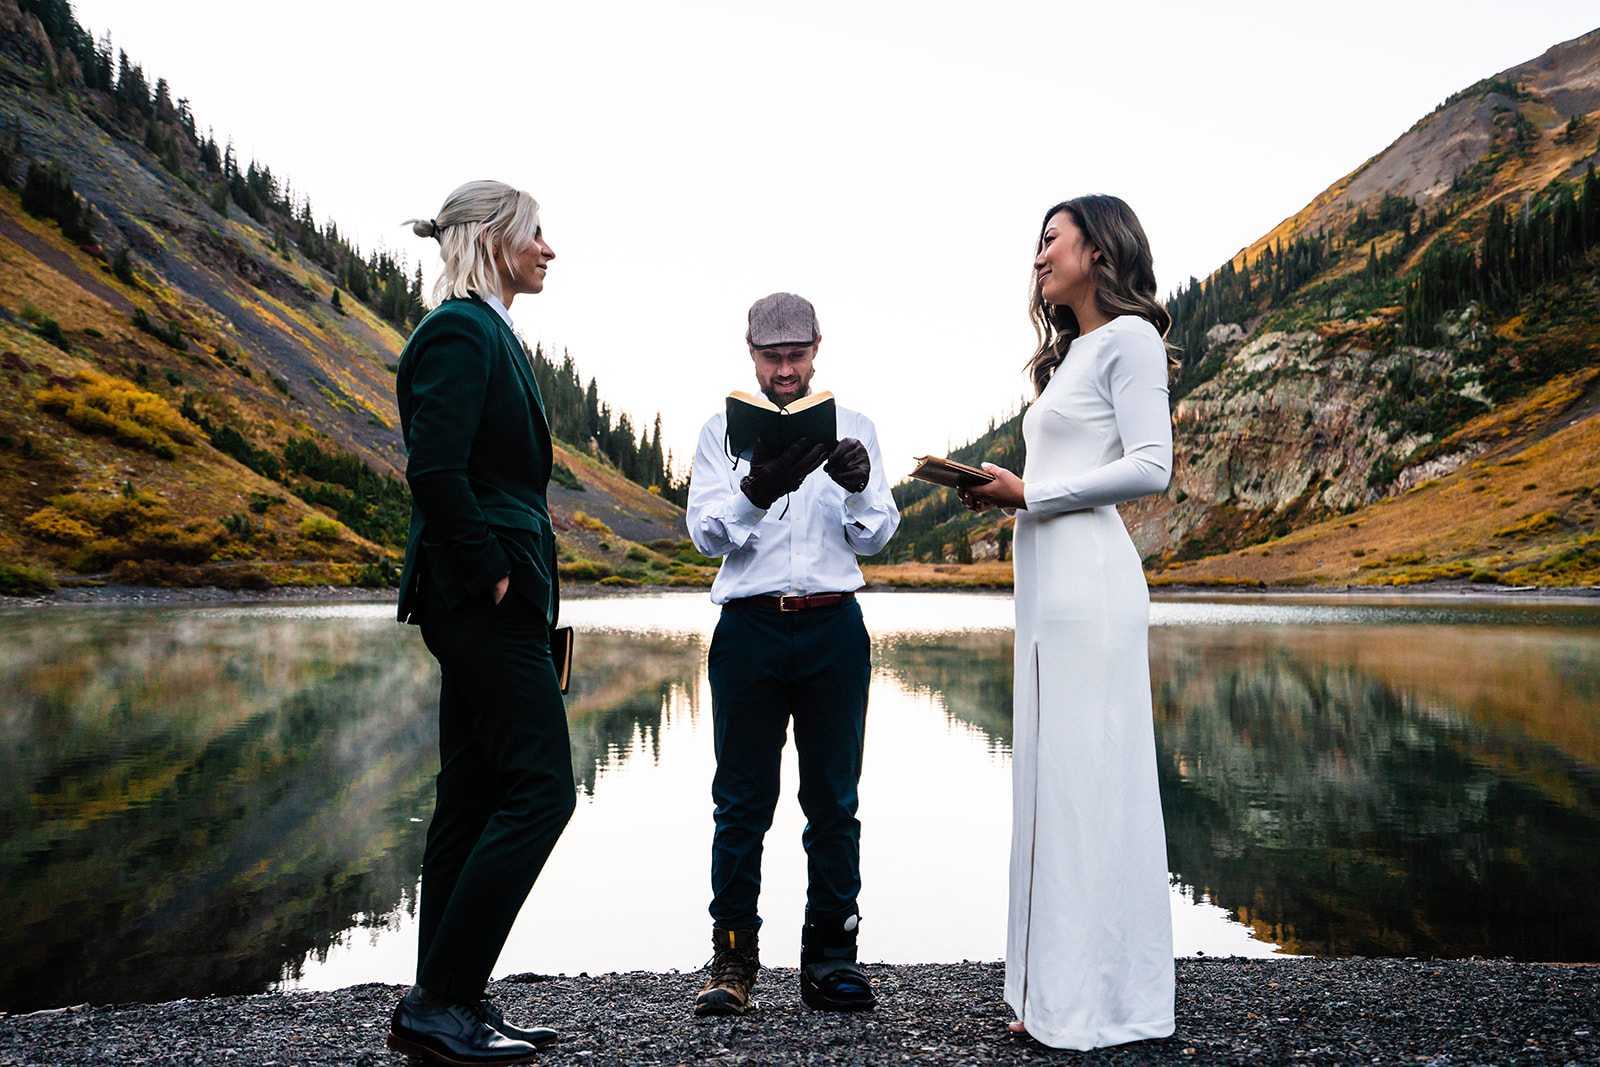 Lesbian Elopement Ceremony at Crested Butte in Colorado